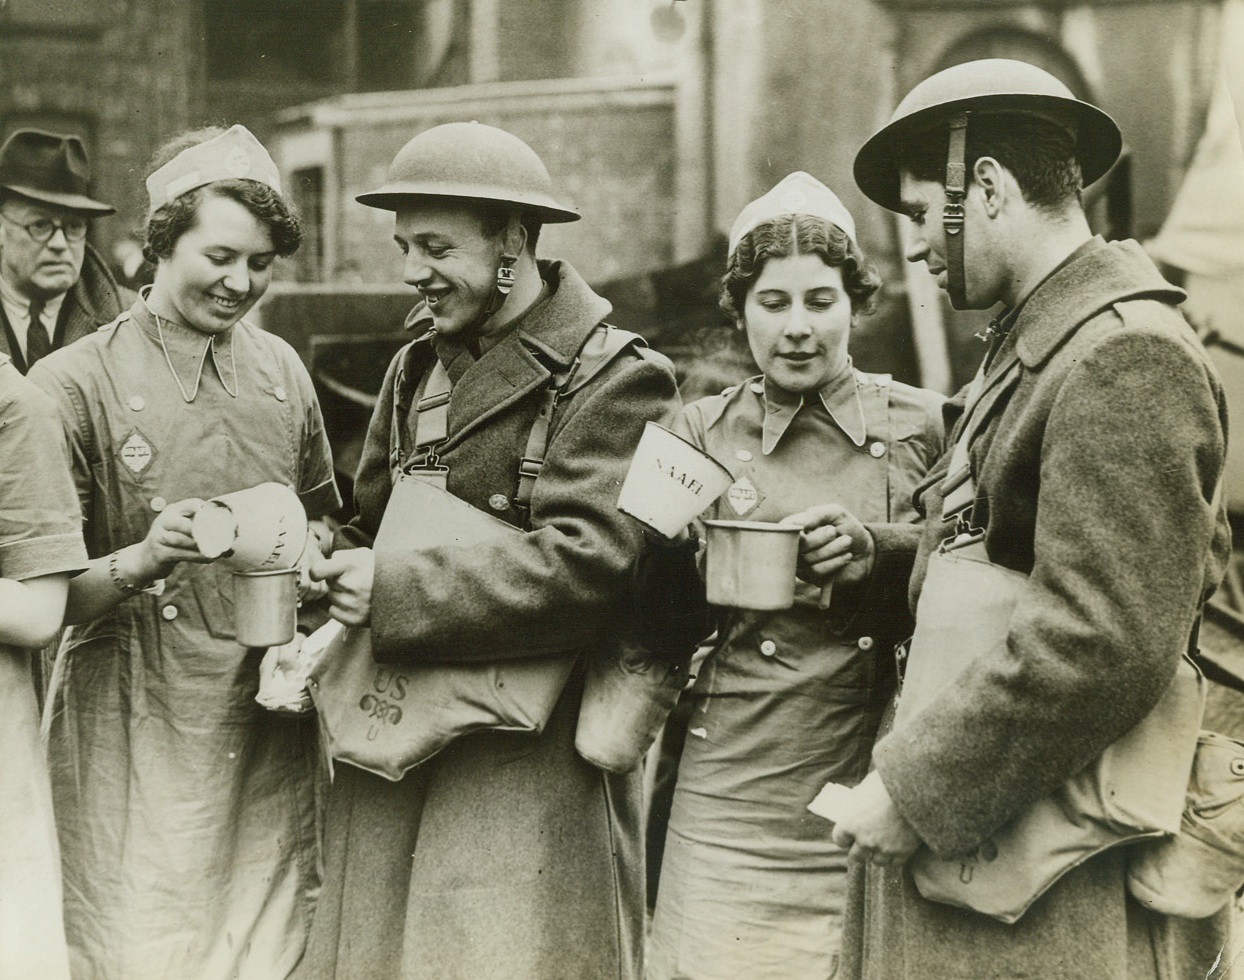 British Girls Pour Tea For Yanks, 2/8/1942. A Northern Irish Port - Girls of the NAAFI, as they poured tea for soldiers of the American Expeditionary Force, recently arrived in Northern Ireland.;